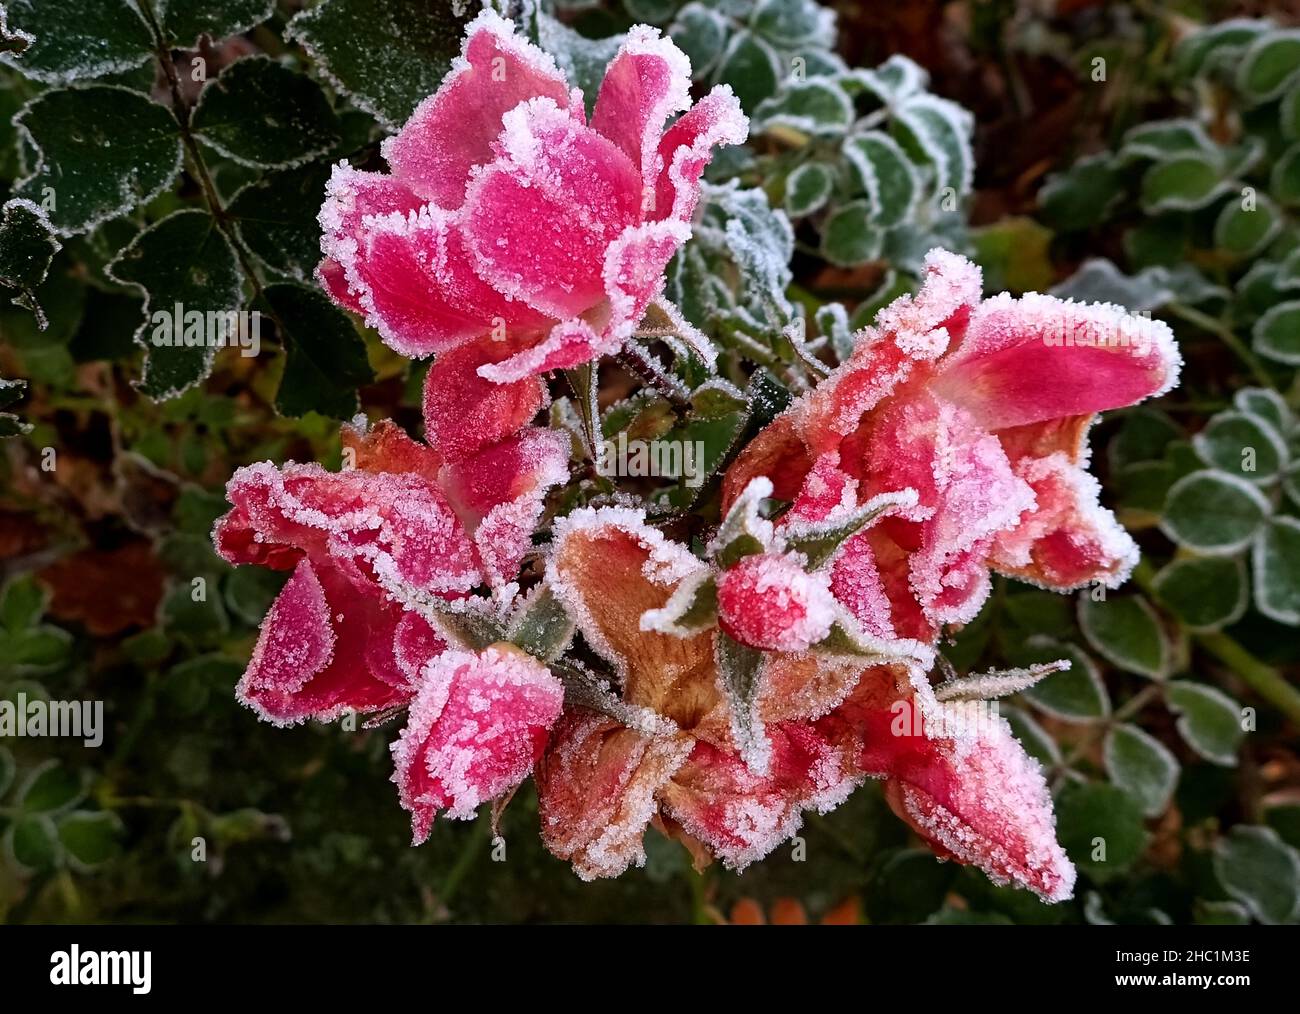 A rose and hoar frost - Stock Photo